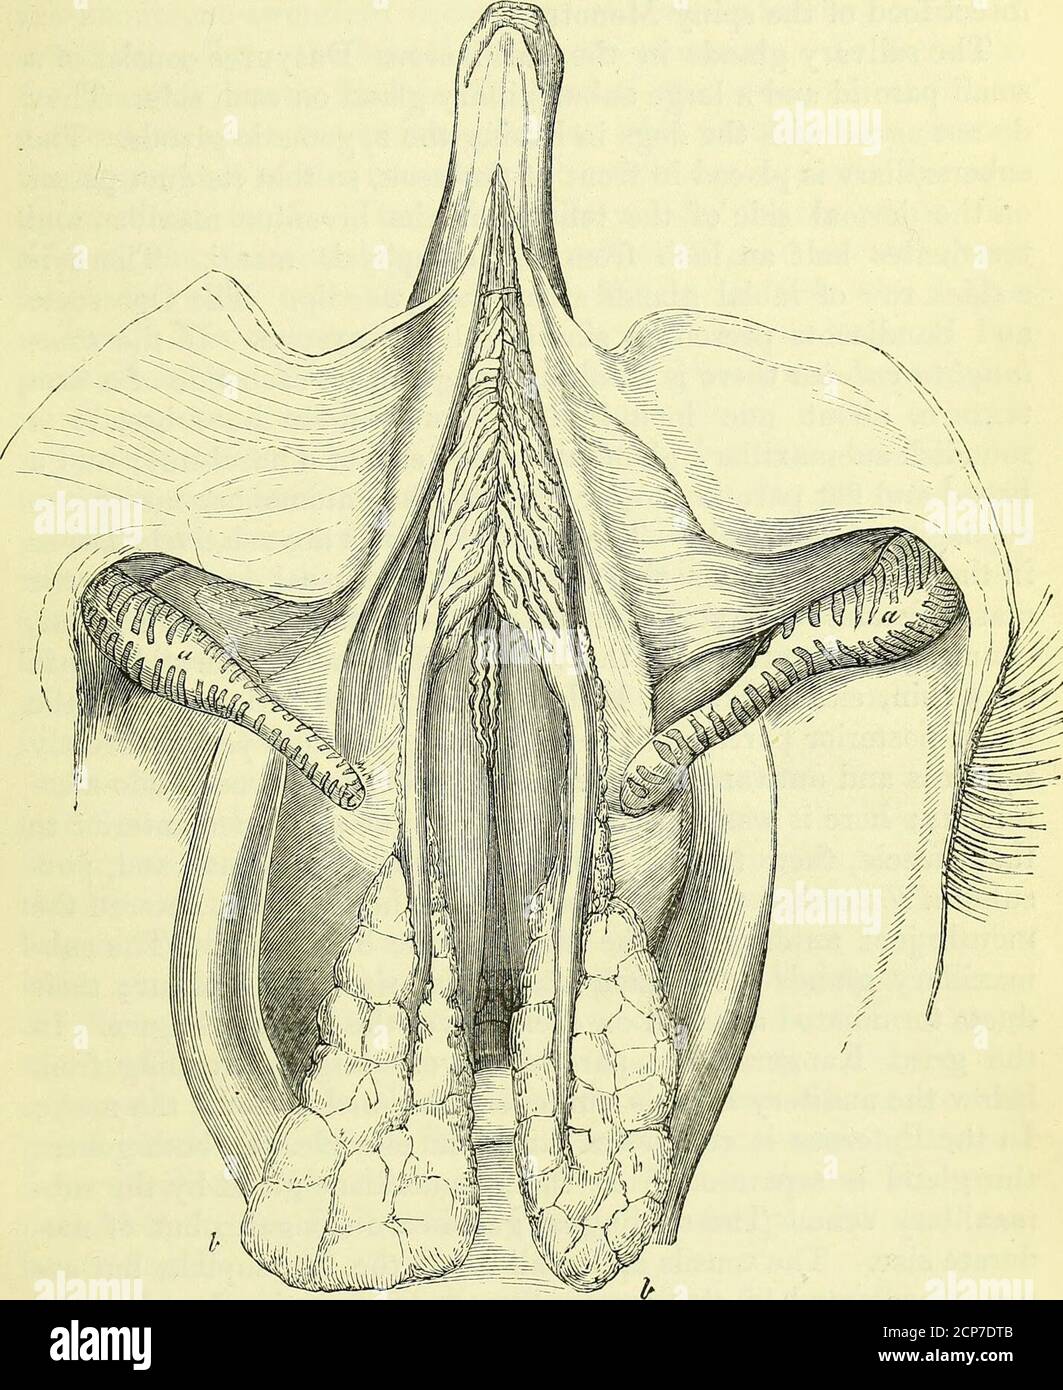 . On the anatomy of vertebrates [electronic resource] . is of unusual dimensions: it extends from the meatus audi- 1 cxvn. p. 29. SALIVARY GLANDS OF MAMMALS. 397 torius along the neck, and upon the anterior part of the thorax :it is a broad, flat, oblong lobulated body, narrowest at its anteriorextremity, from which the wide duct emerges. When the duct 302. Submaxillary glands, Echidna setosa; nat. size. has reached the interspace of the lower jaw, it dilates, and thendivides into eight or ten undulating branches, which subdivideand ultimately terminate by numerous orifices upon the mem- 398 A Stock Photo